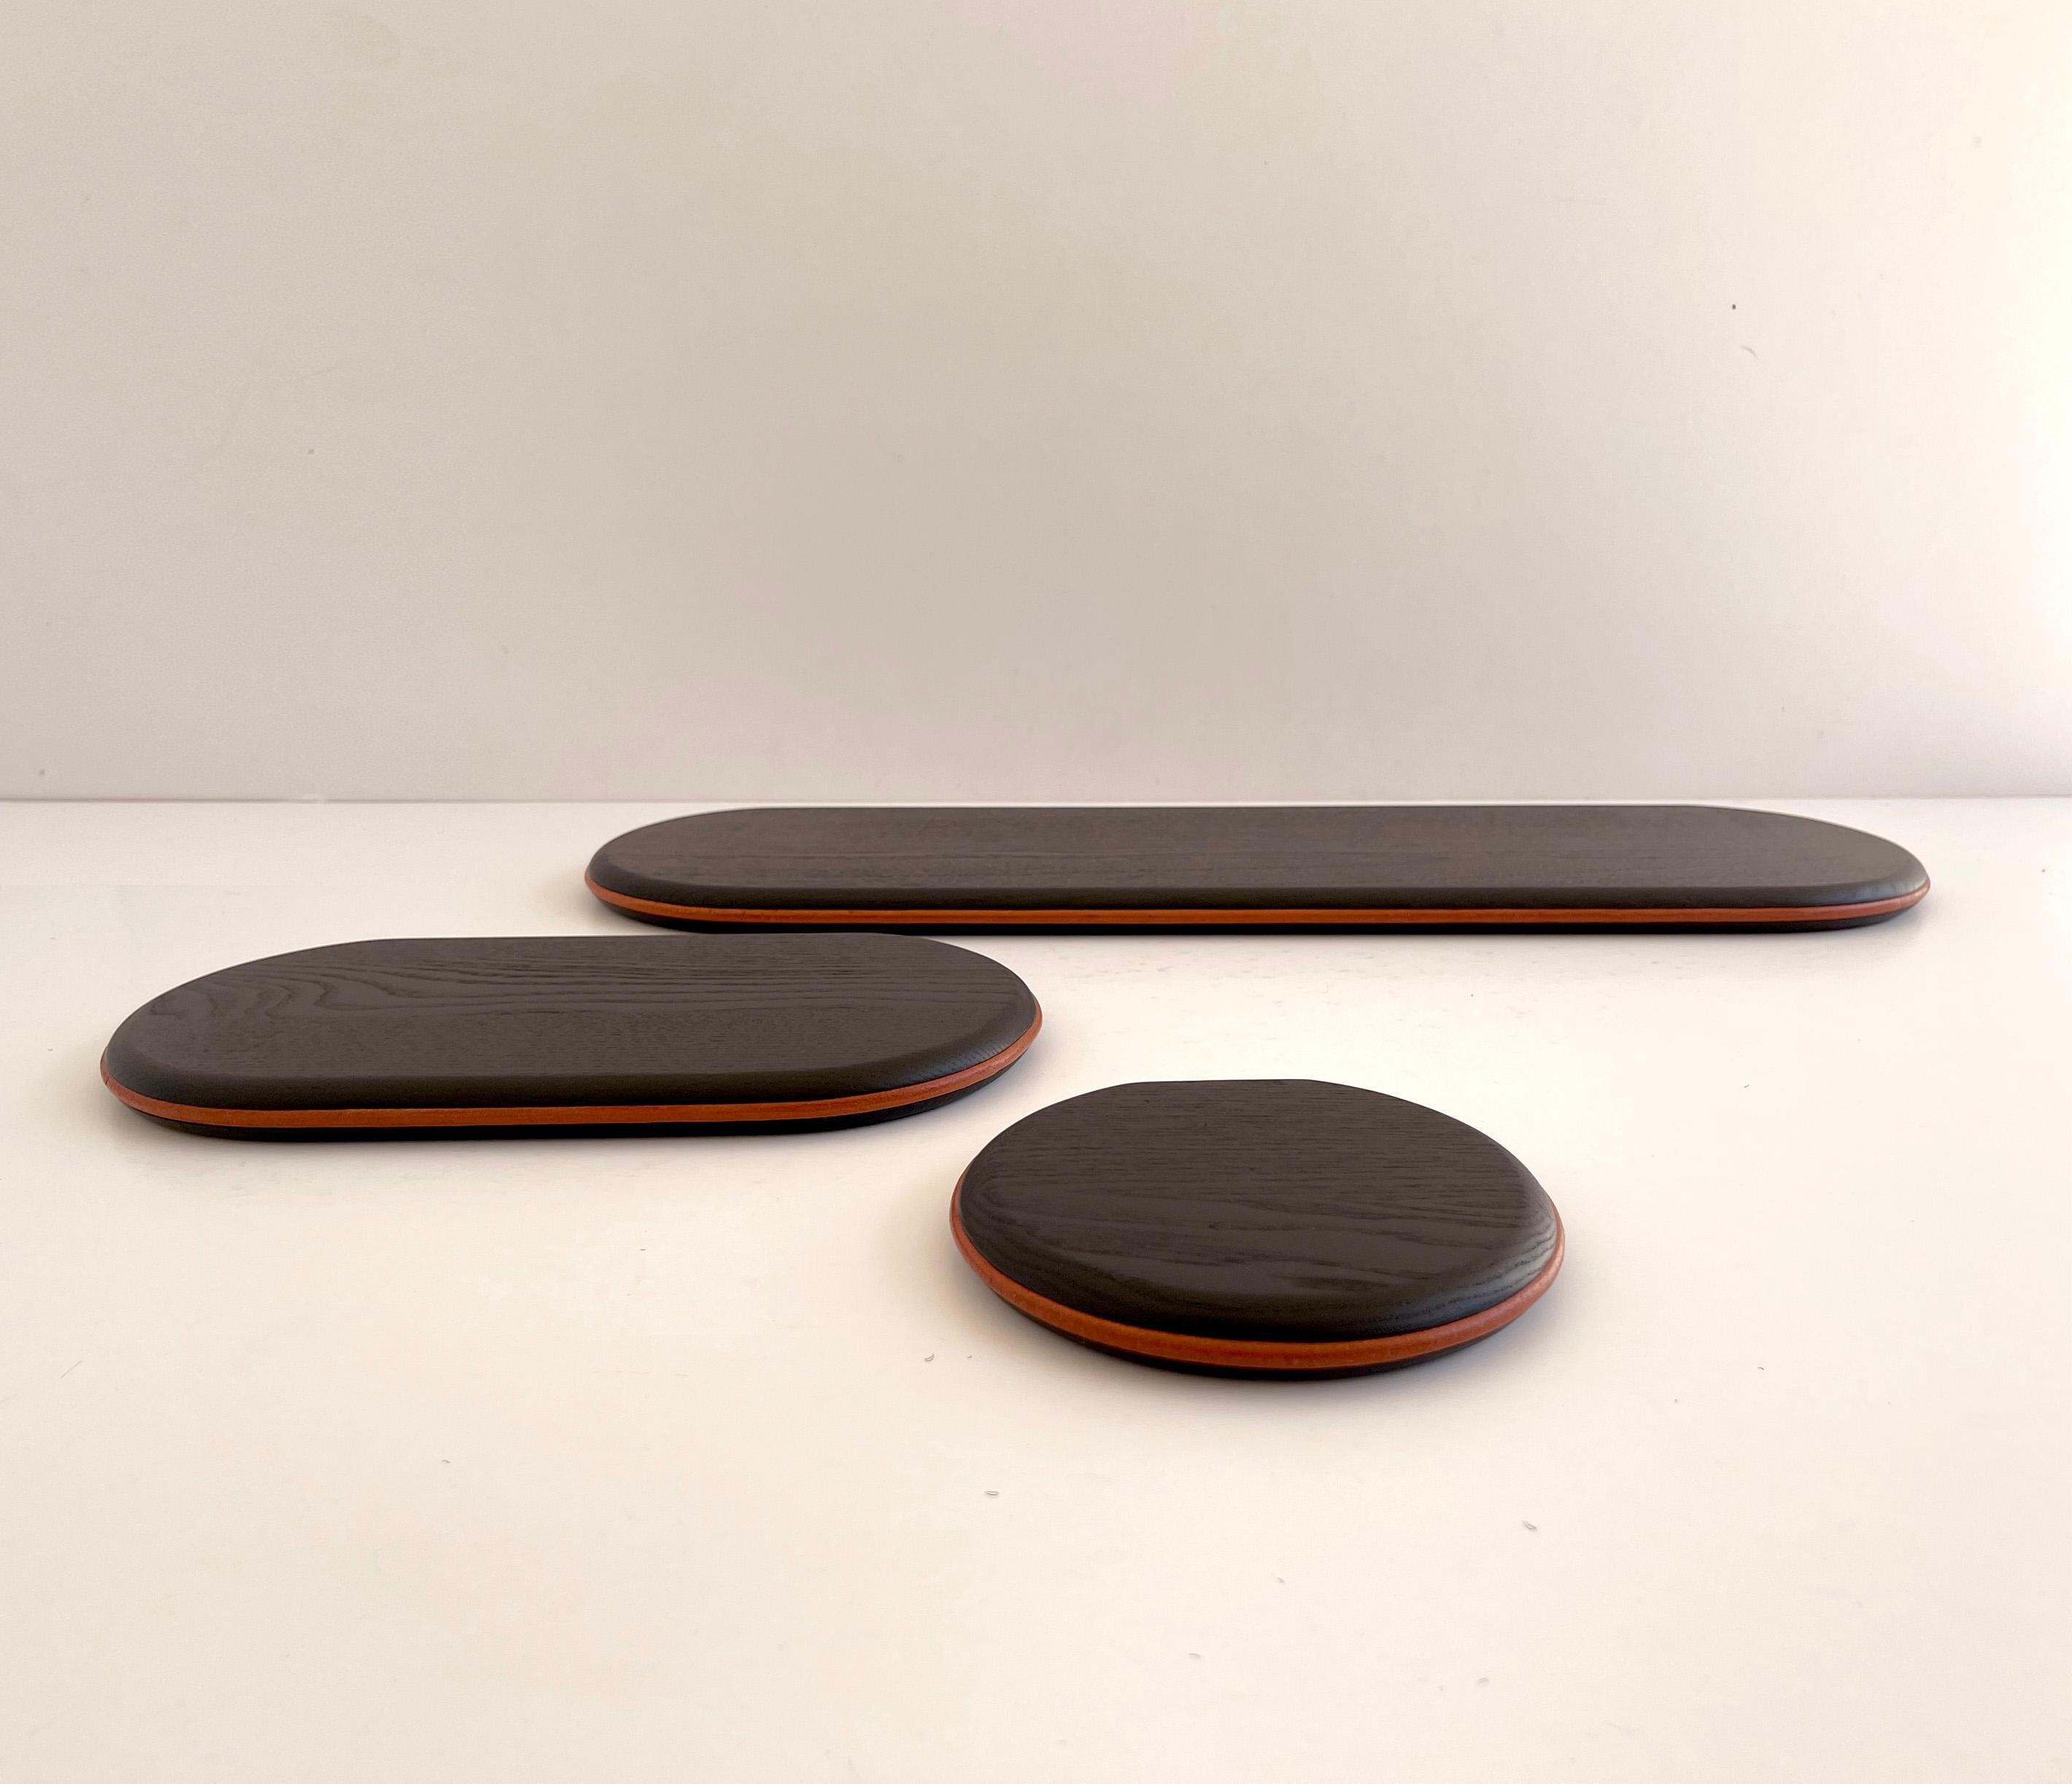 Set of 3 Black Ash and Orange Leather Waly Shelves by Mademoiselle Jo
Dimensions: Round: D 14 x W 15 x H 2 cm.
Small: D 17 x W 30 x H 2 cm.
Large: D 17 x W 60 x H 2 cm.
Materials: Black stained ash and orange leather.

Available in two wood colors.